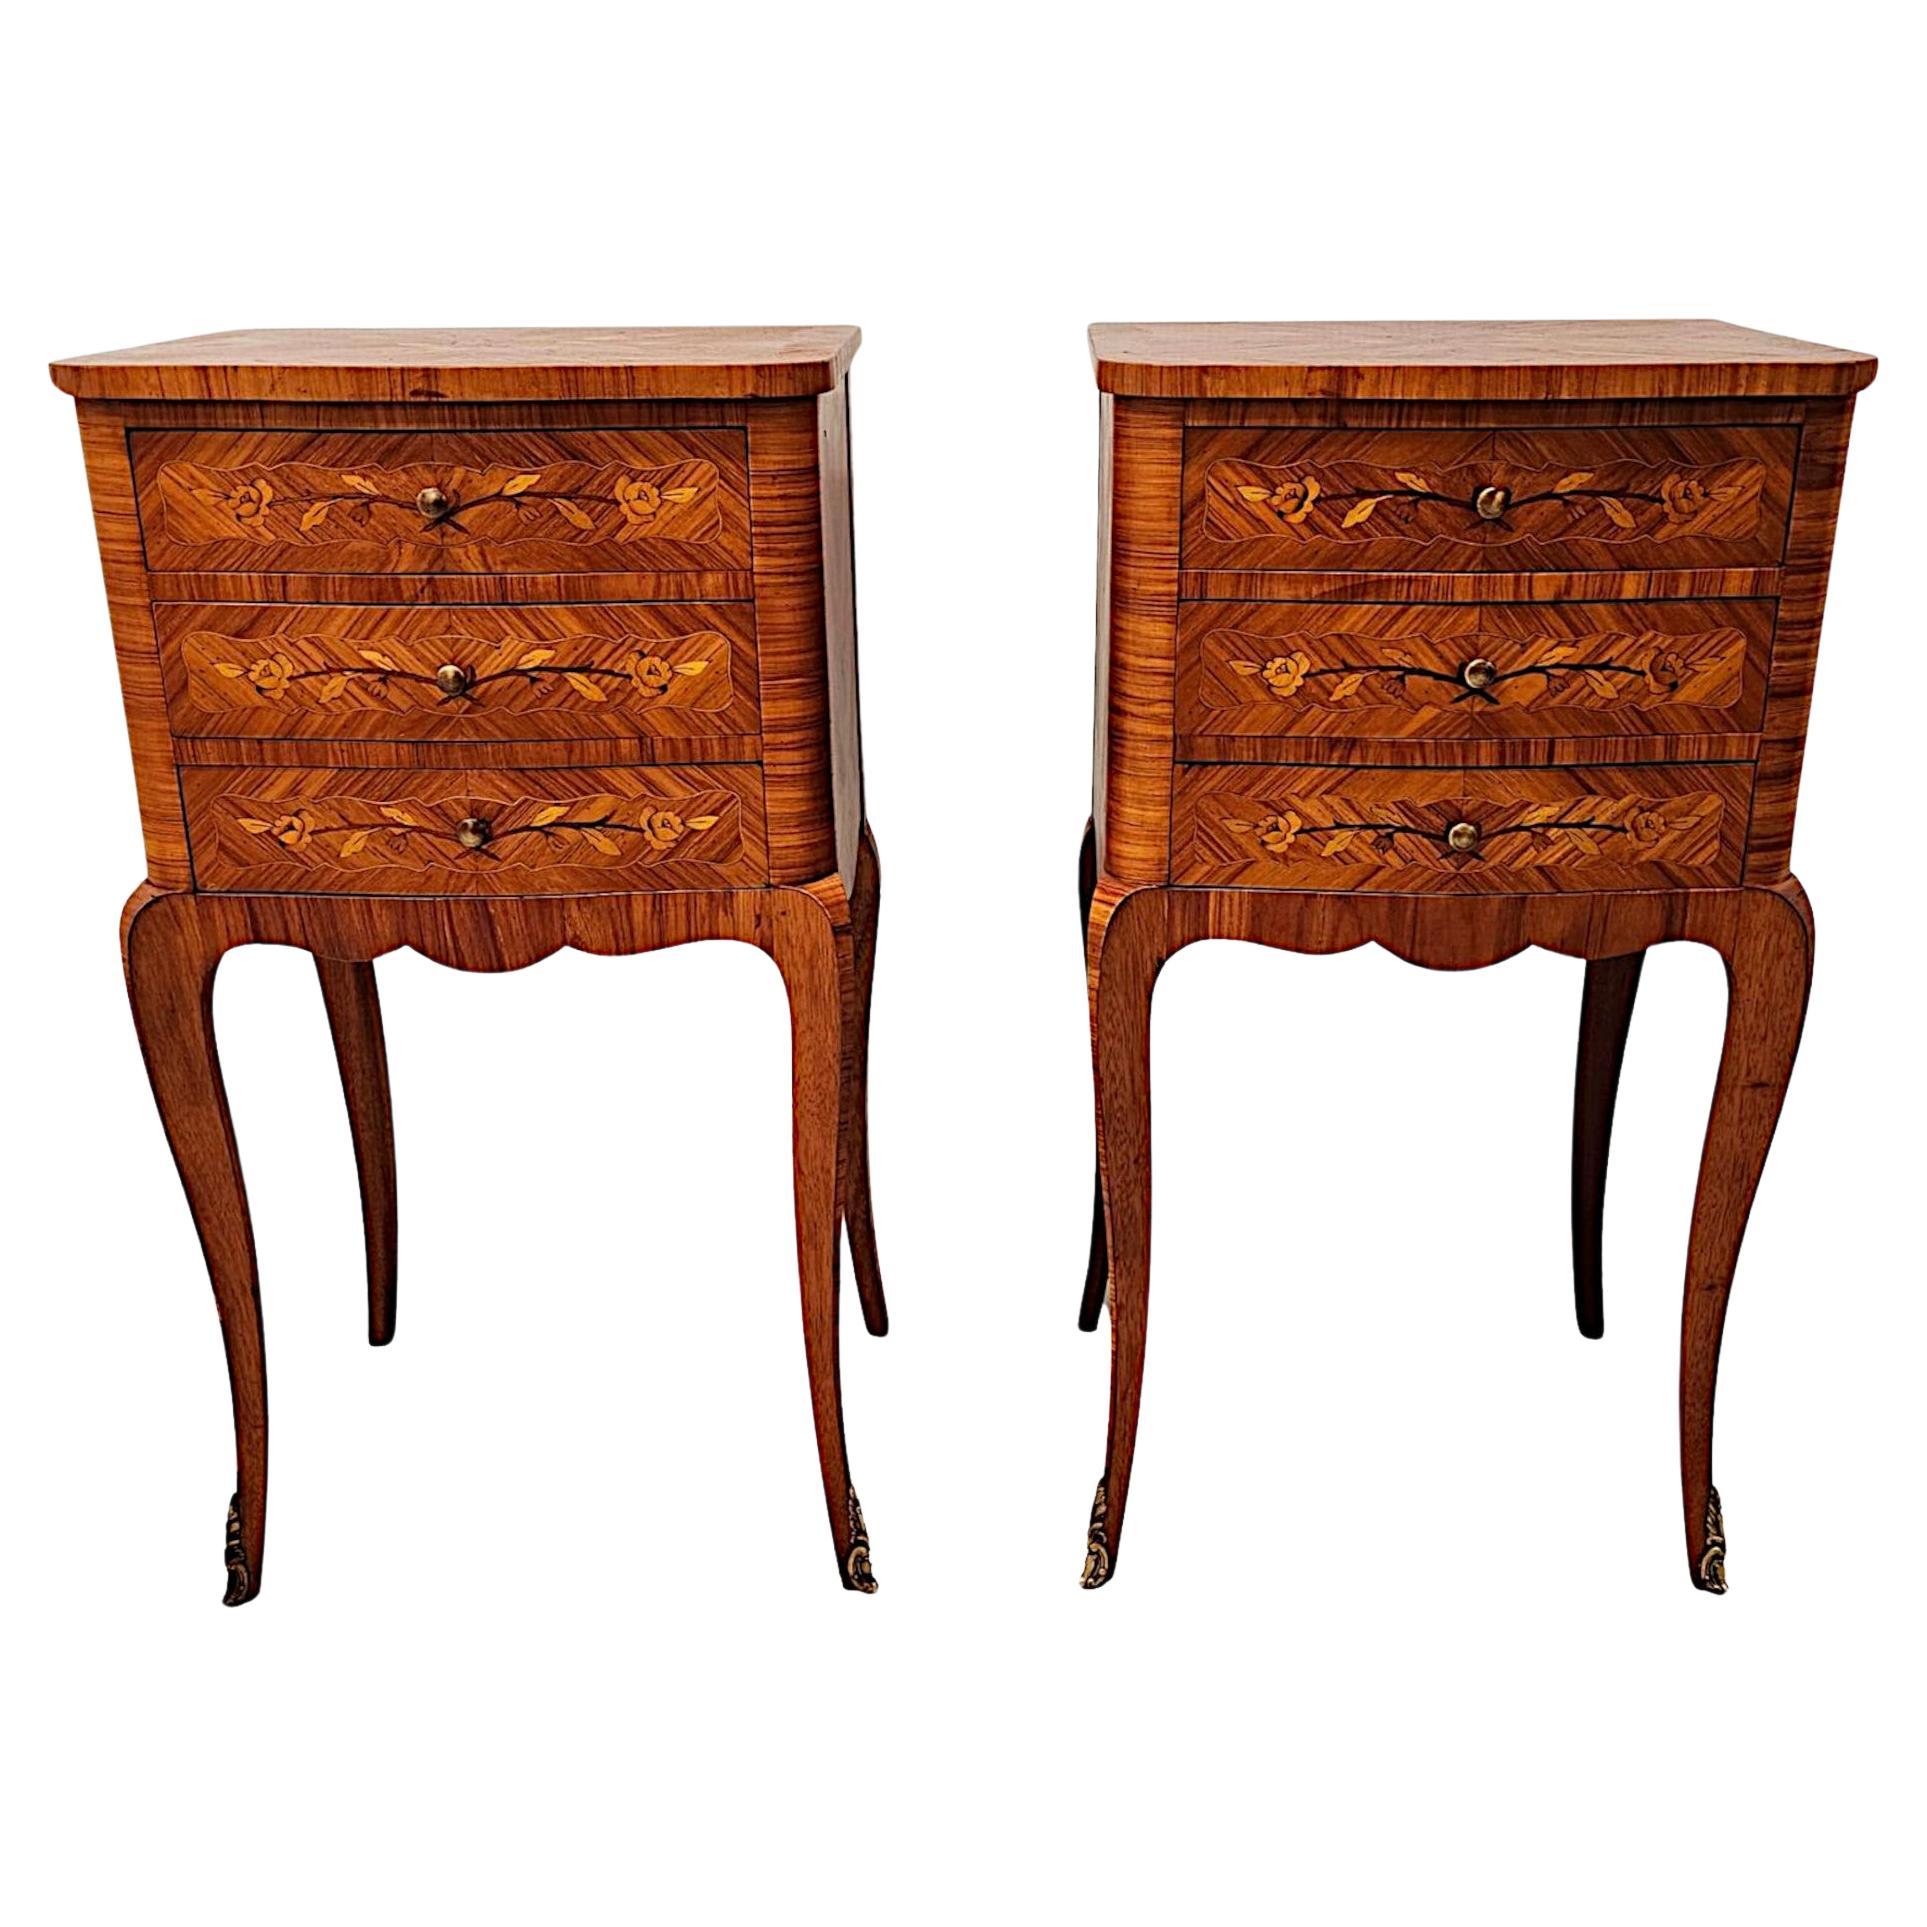 A Fabulous Pair of Early 20th Century Marquetry Inlaid Bedside Tables or Chests For Sale